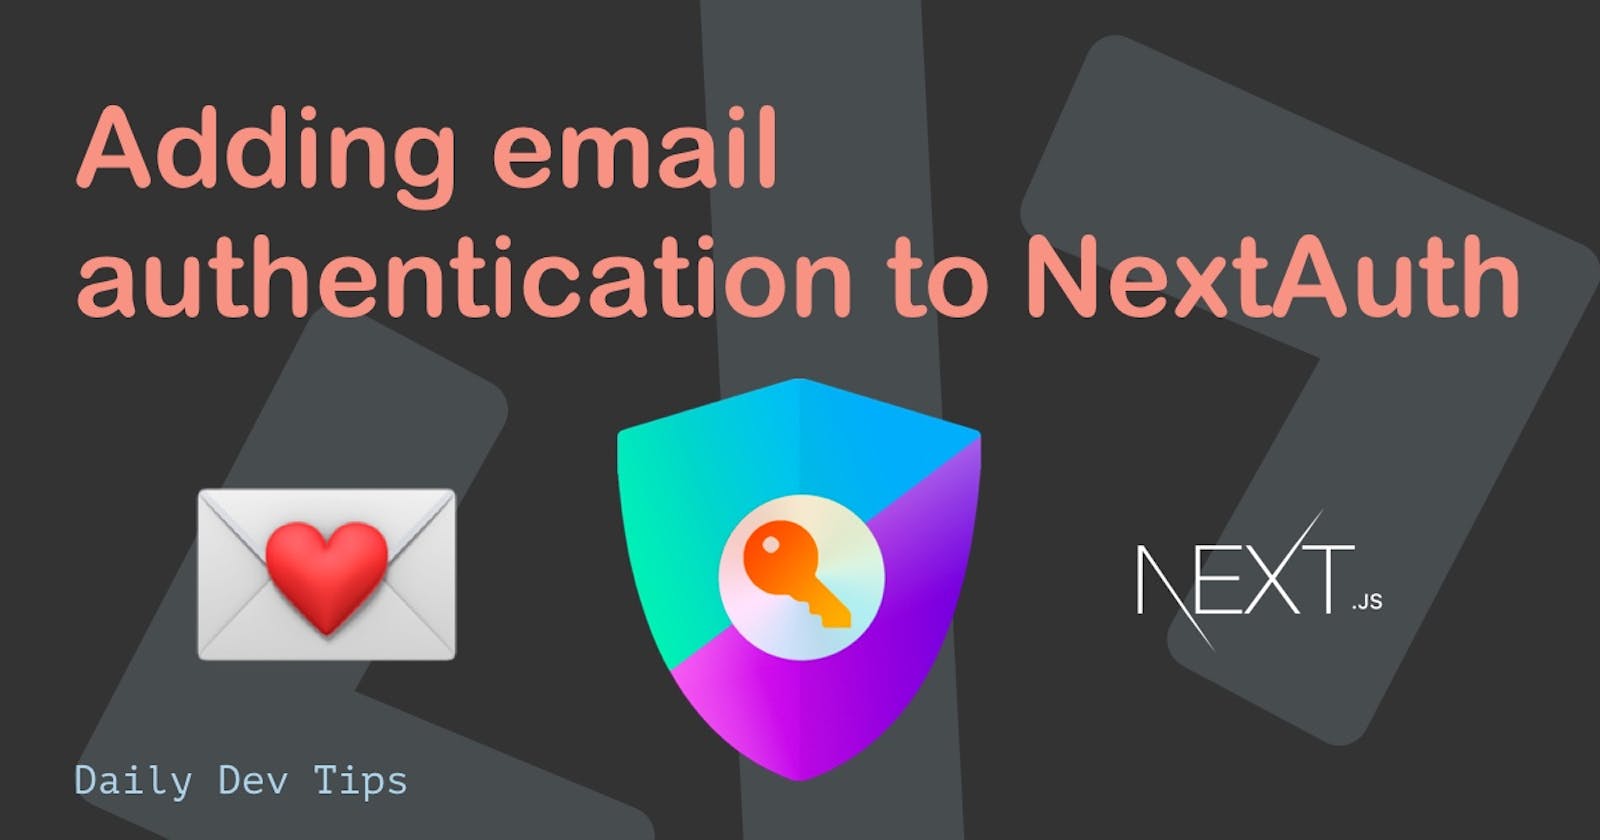 Adding email authentication to NextAuth